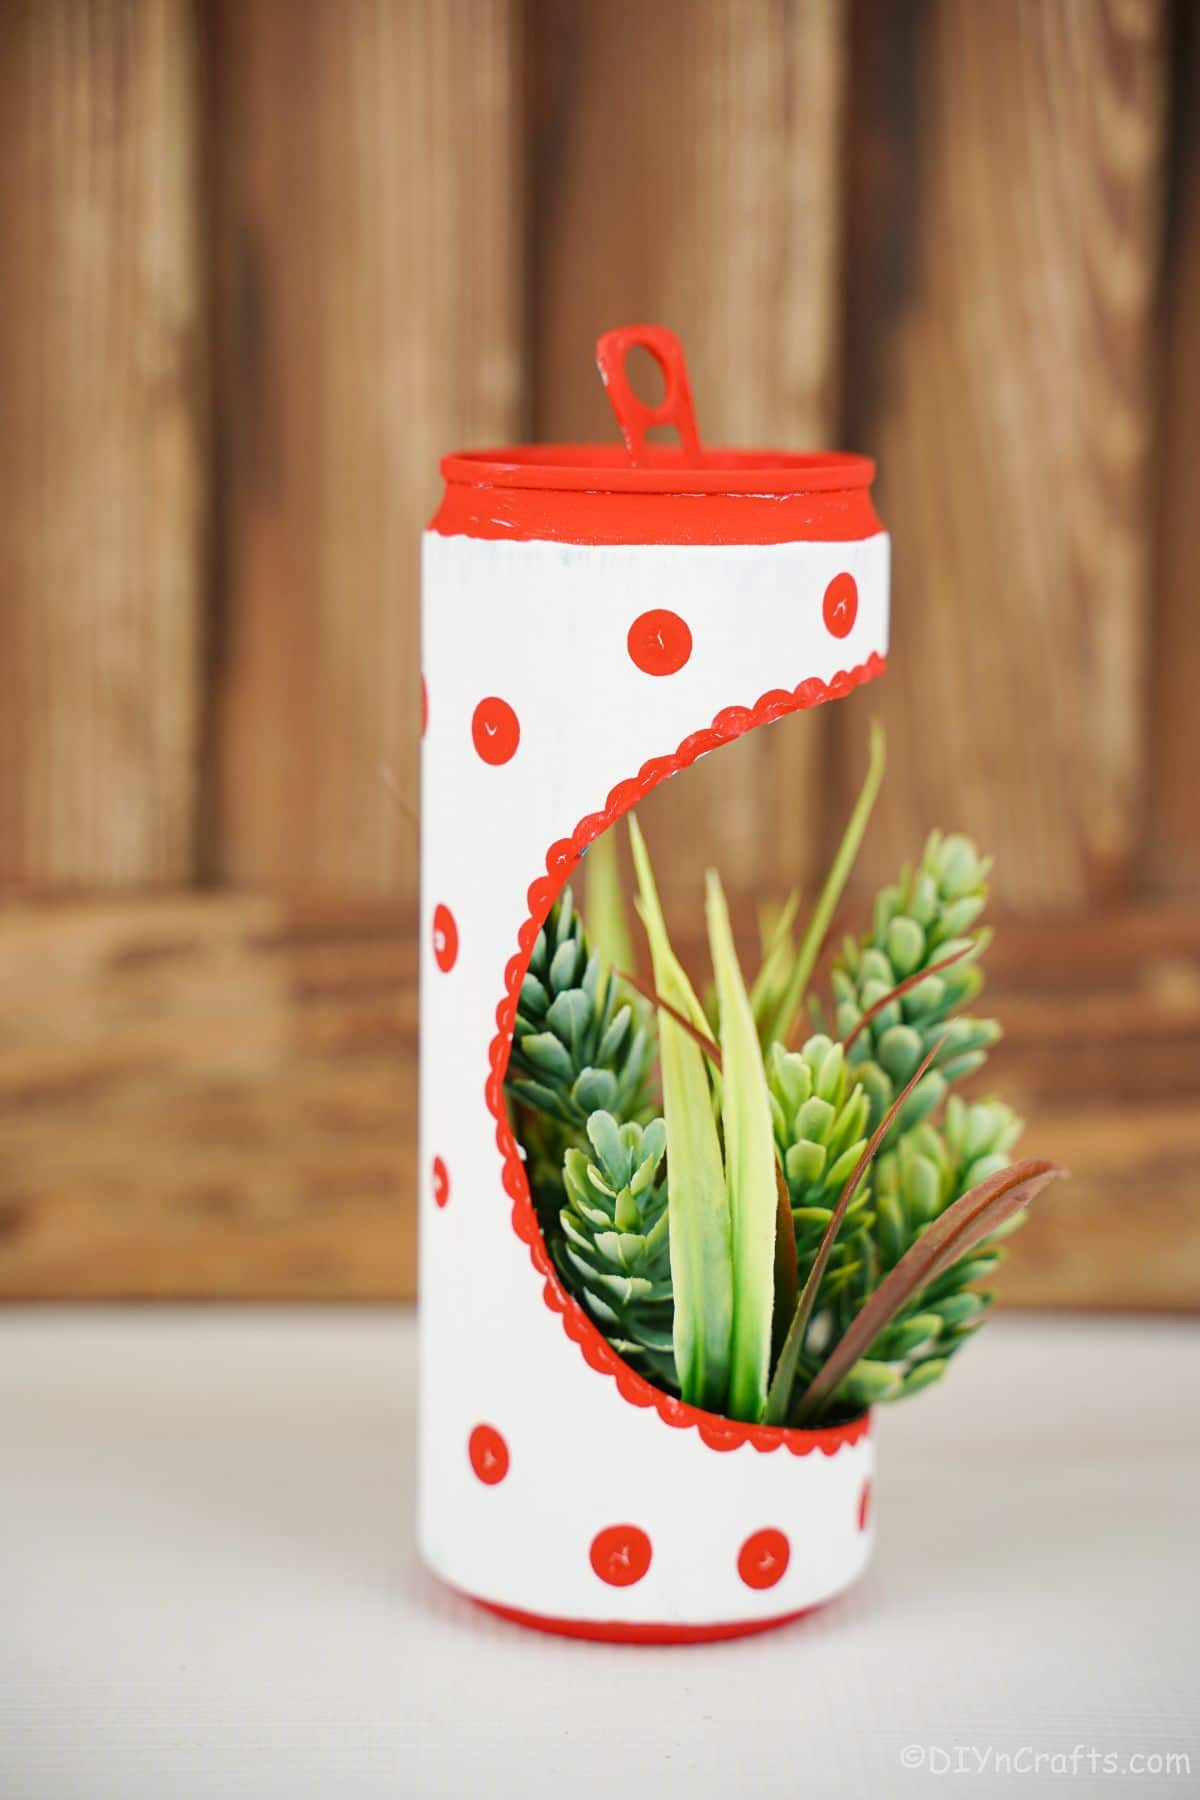 white soda can with red dots as a succulent planter on table with wood background